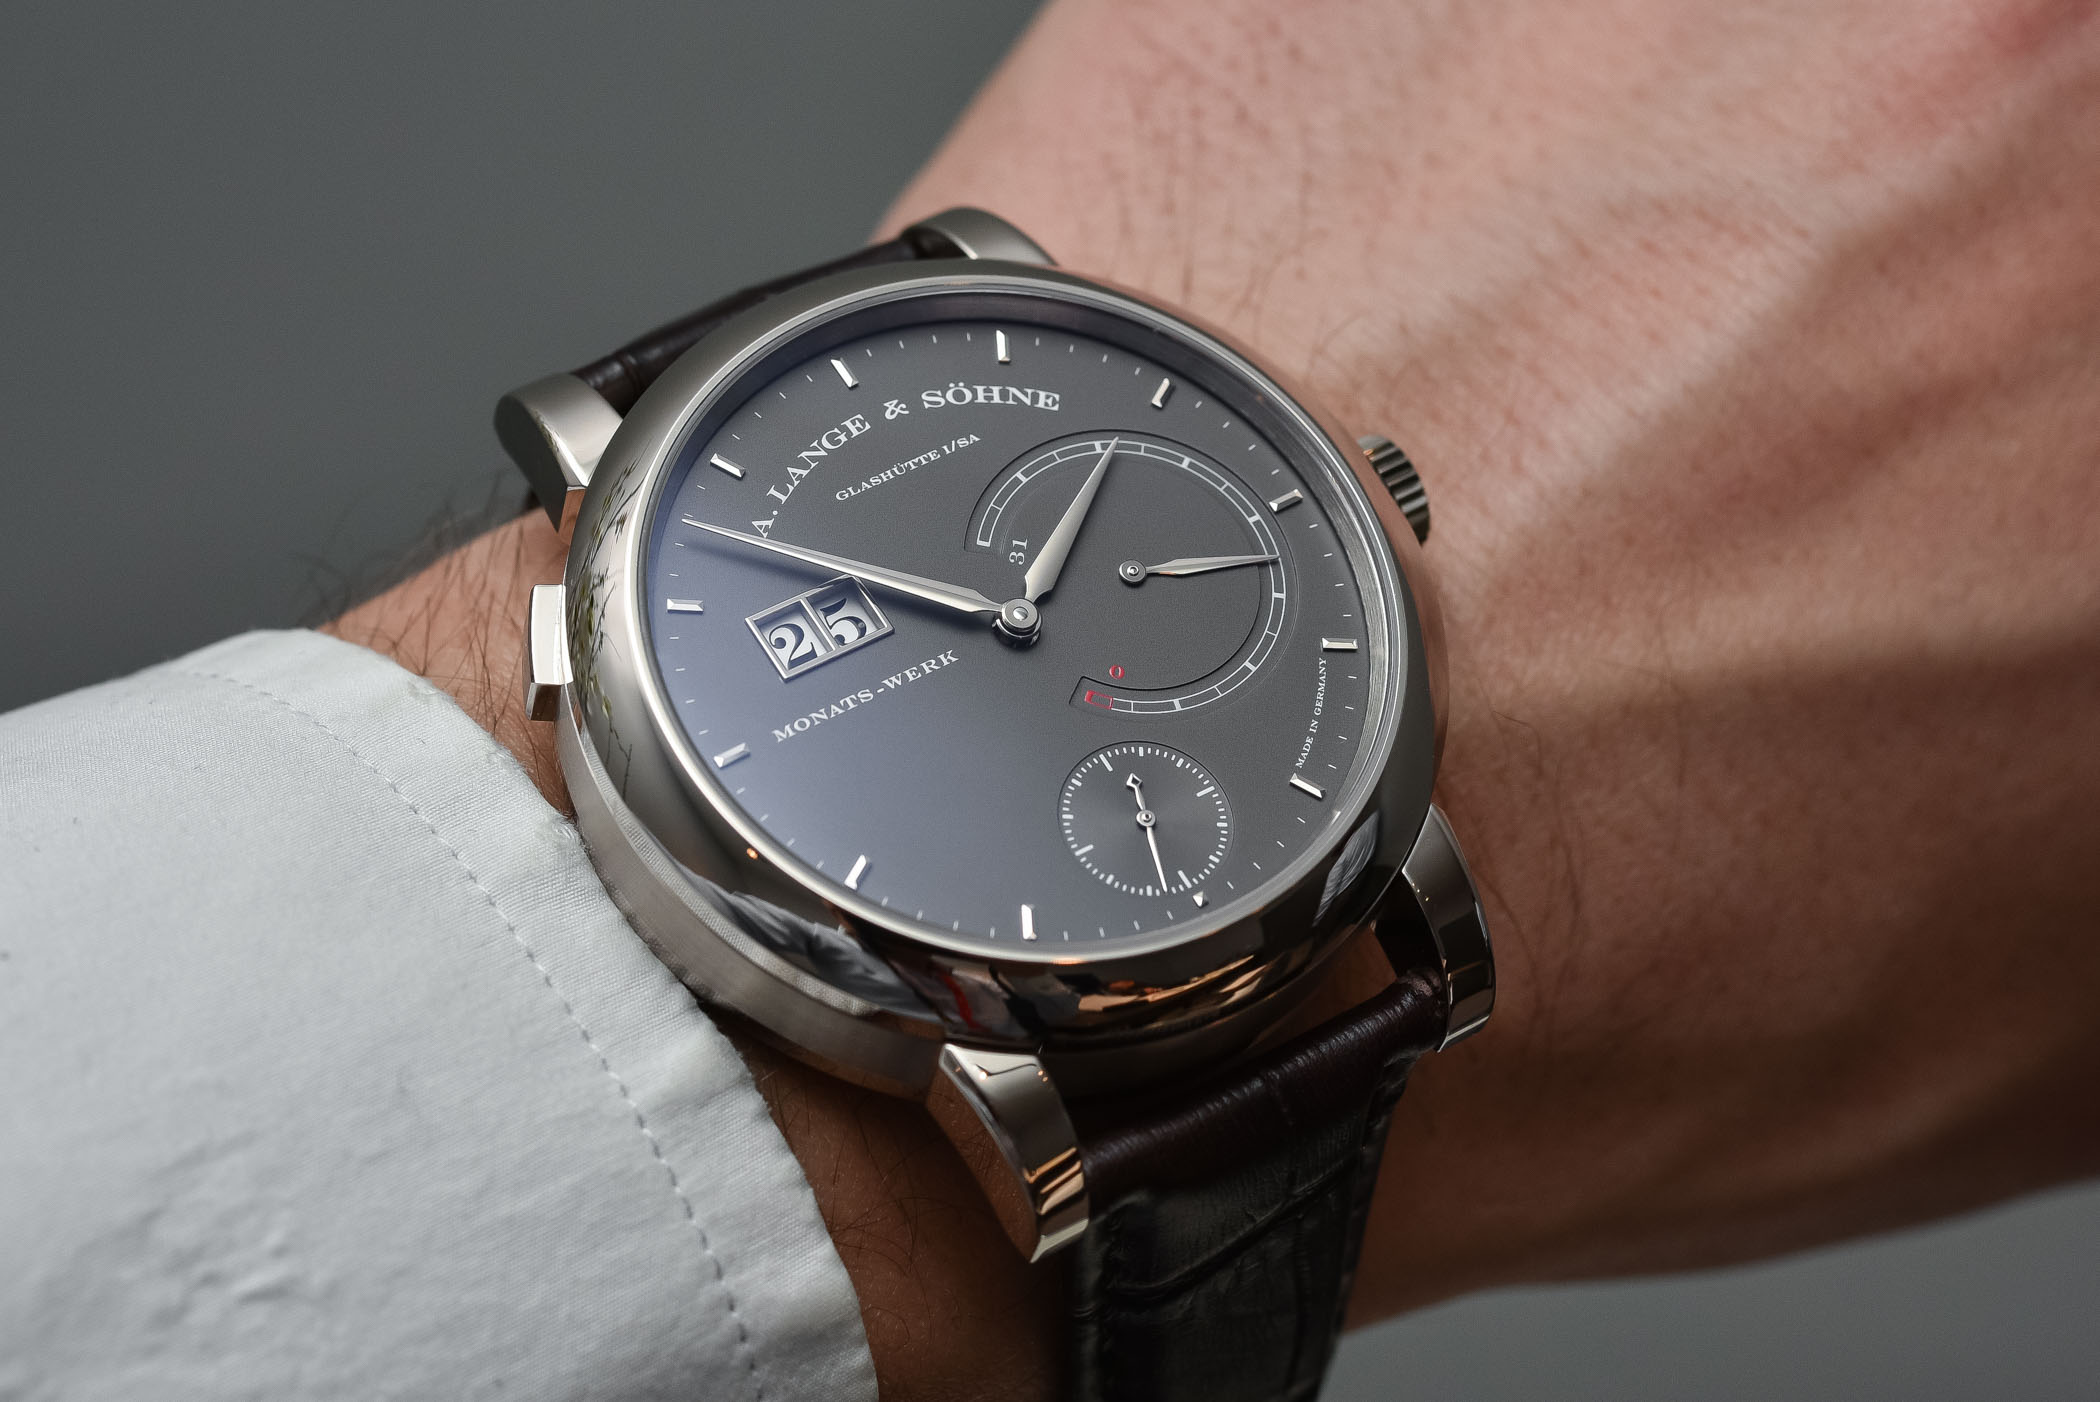 A Full Month of Power on the Wrist - Hands-On with the A. Lange & Söhne ...